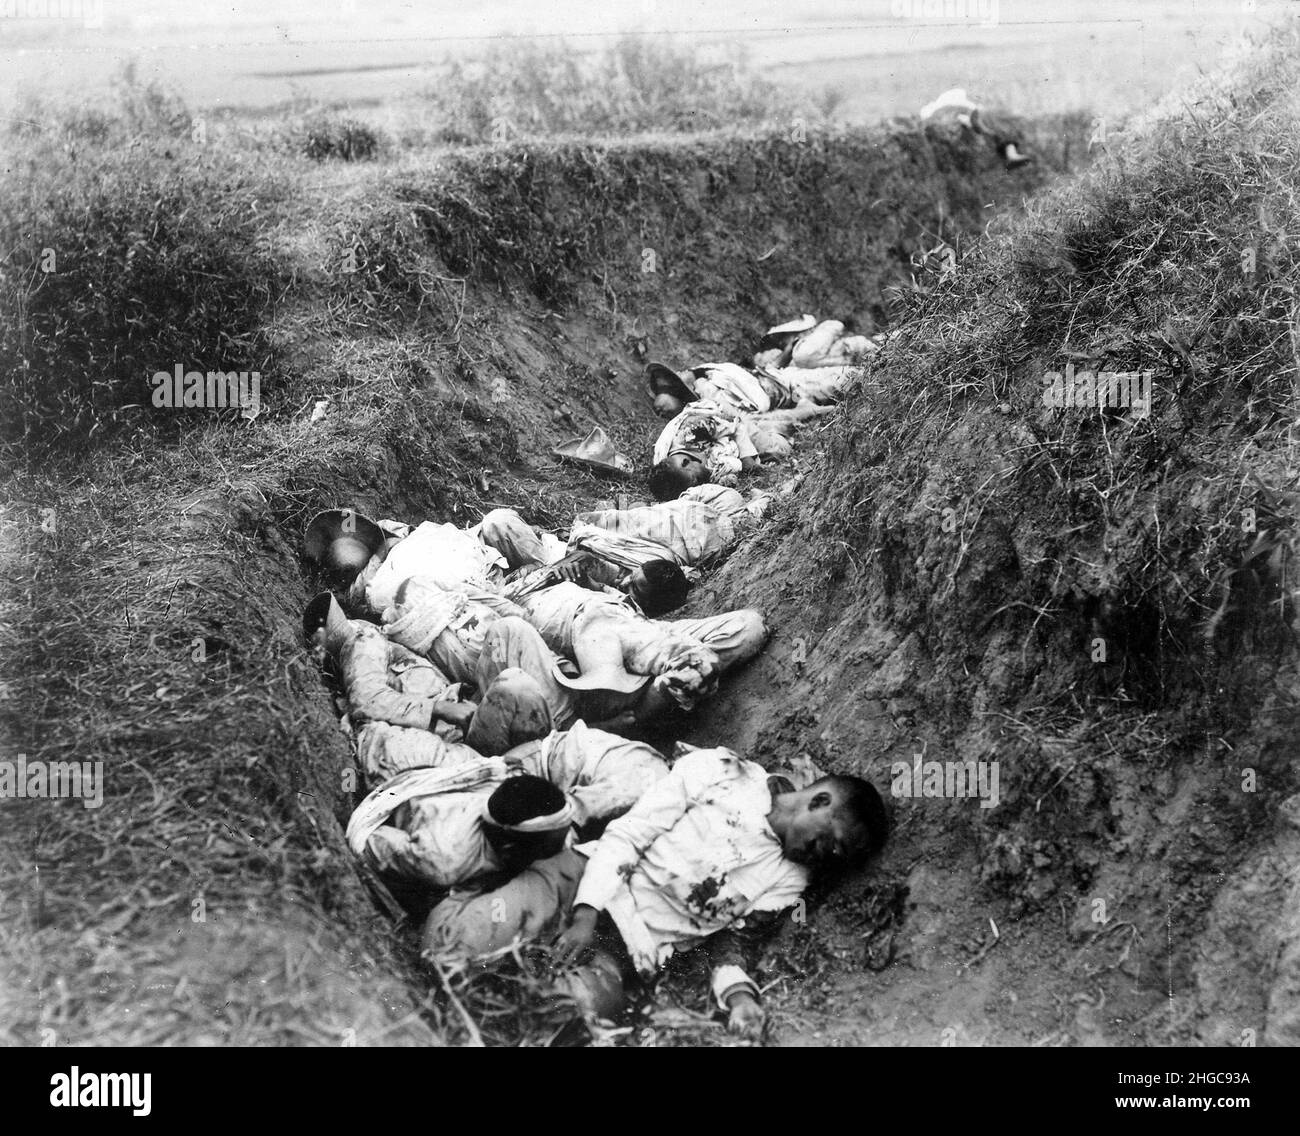 Filipino casualties dead in a trench on the first day of the  Filipino-American war which lasted from 1899 to 1902 Stock Photo